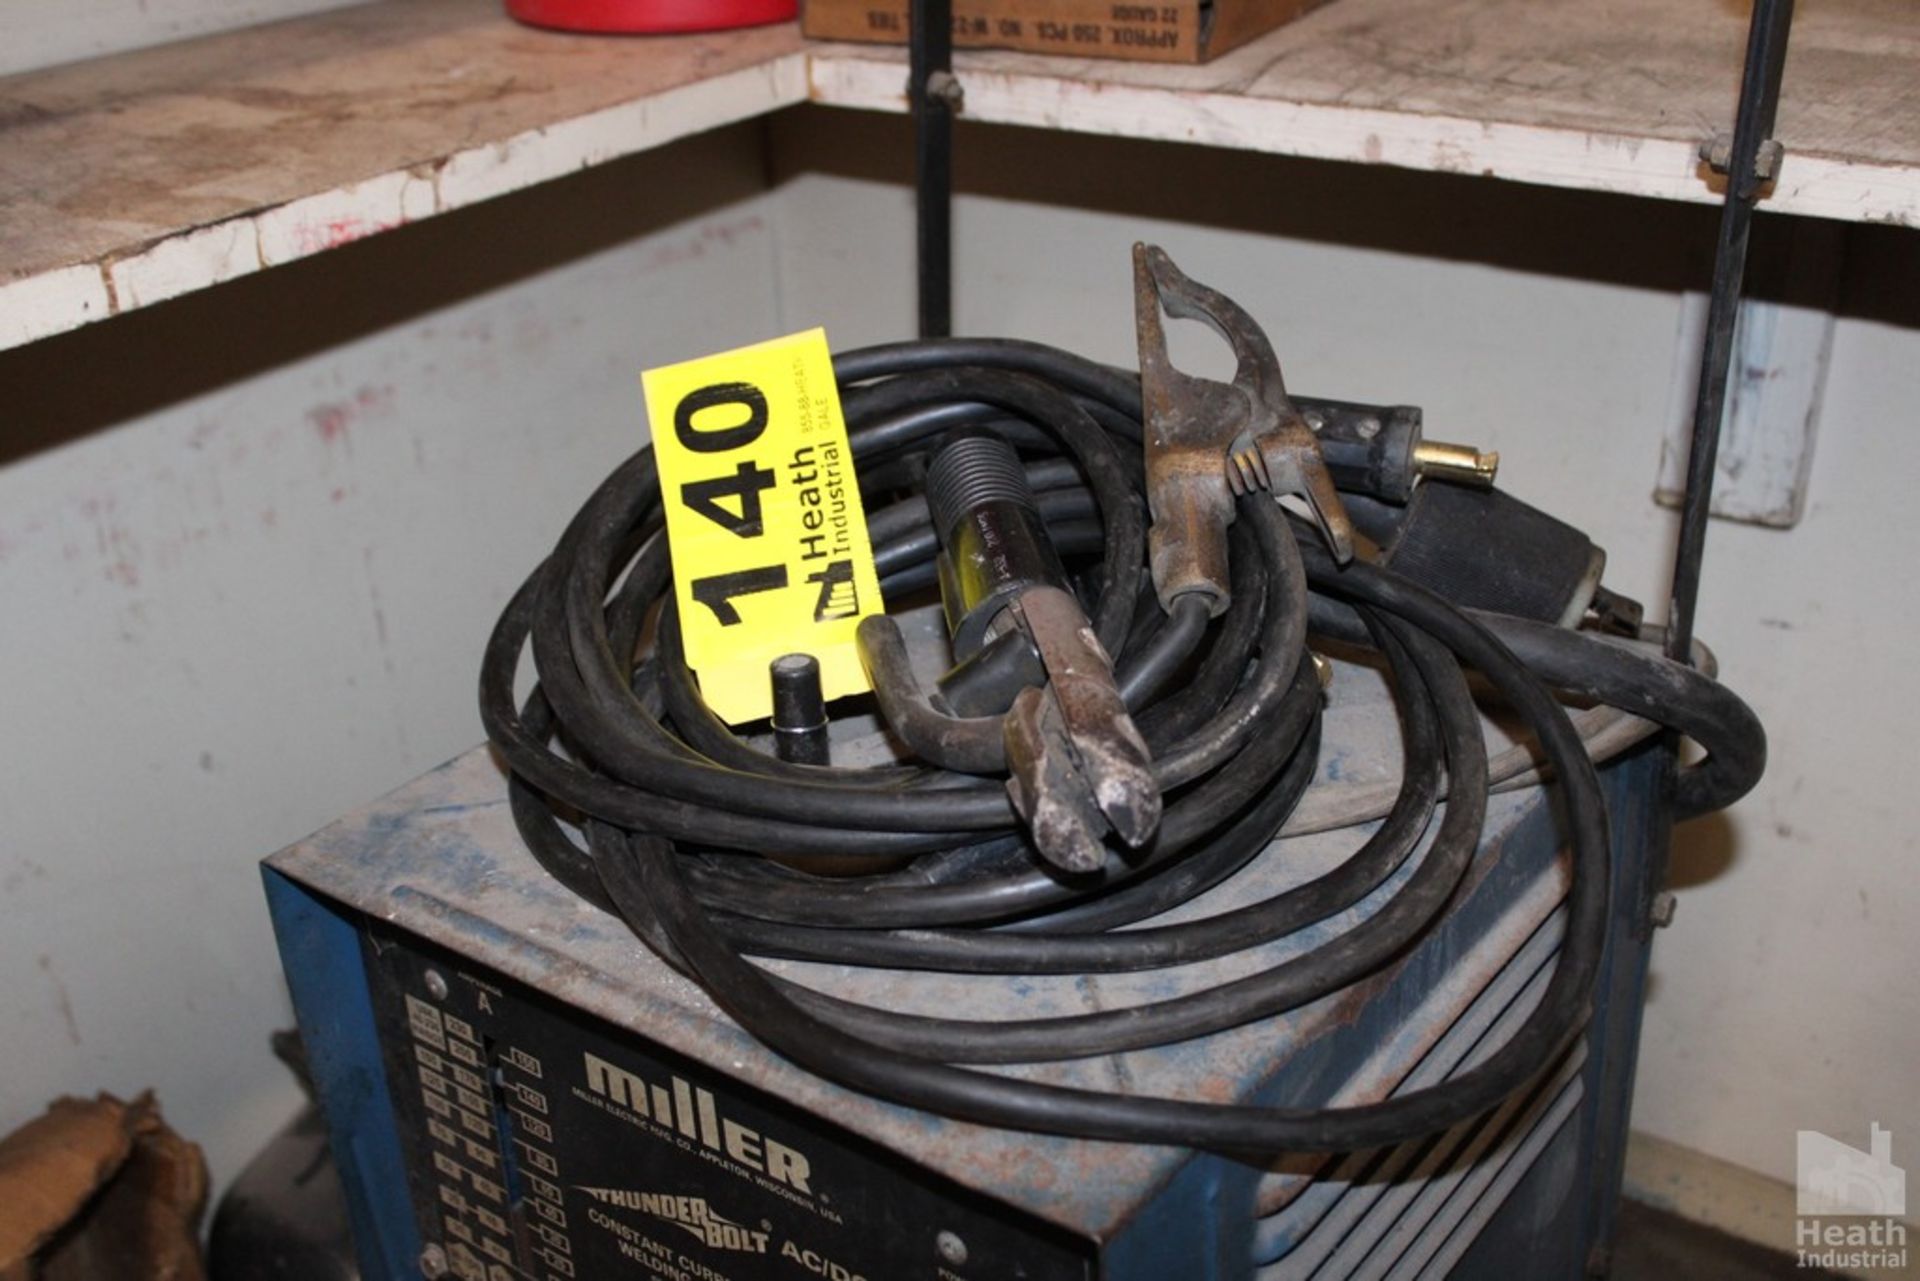 MILLER "THUNDERBOLT" AC/DC CONSTANT CURRENT AC/DC ARC WELDING POWER SOURCE - Image 3 of 3